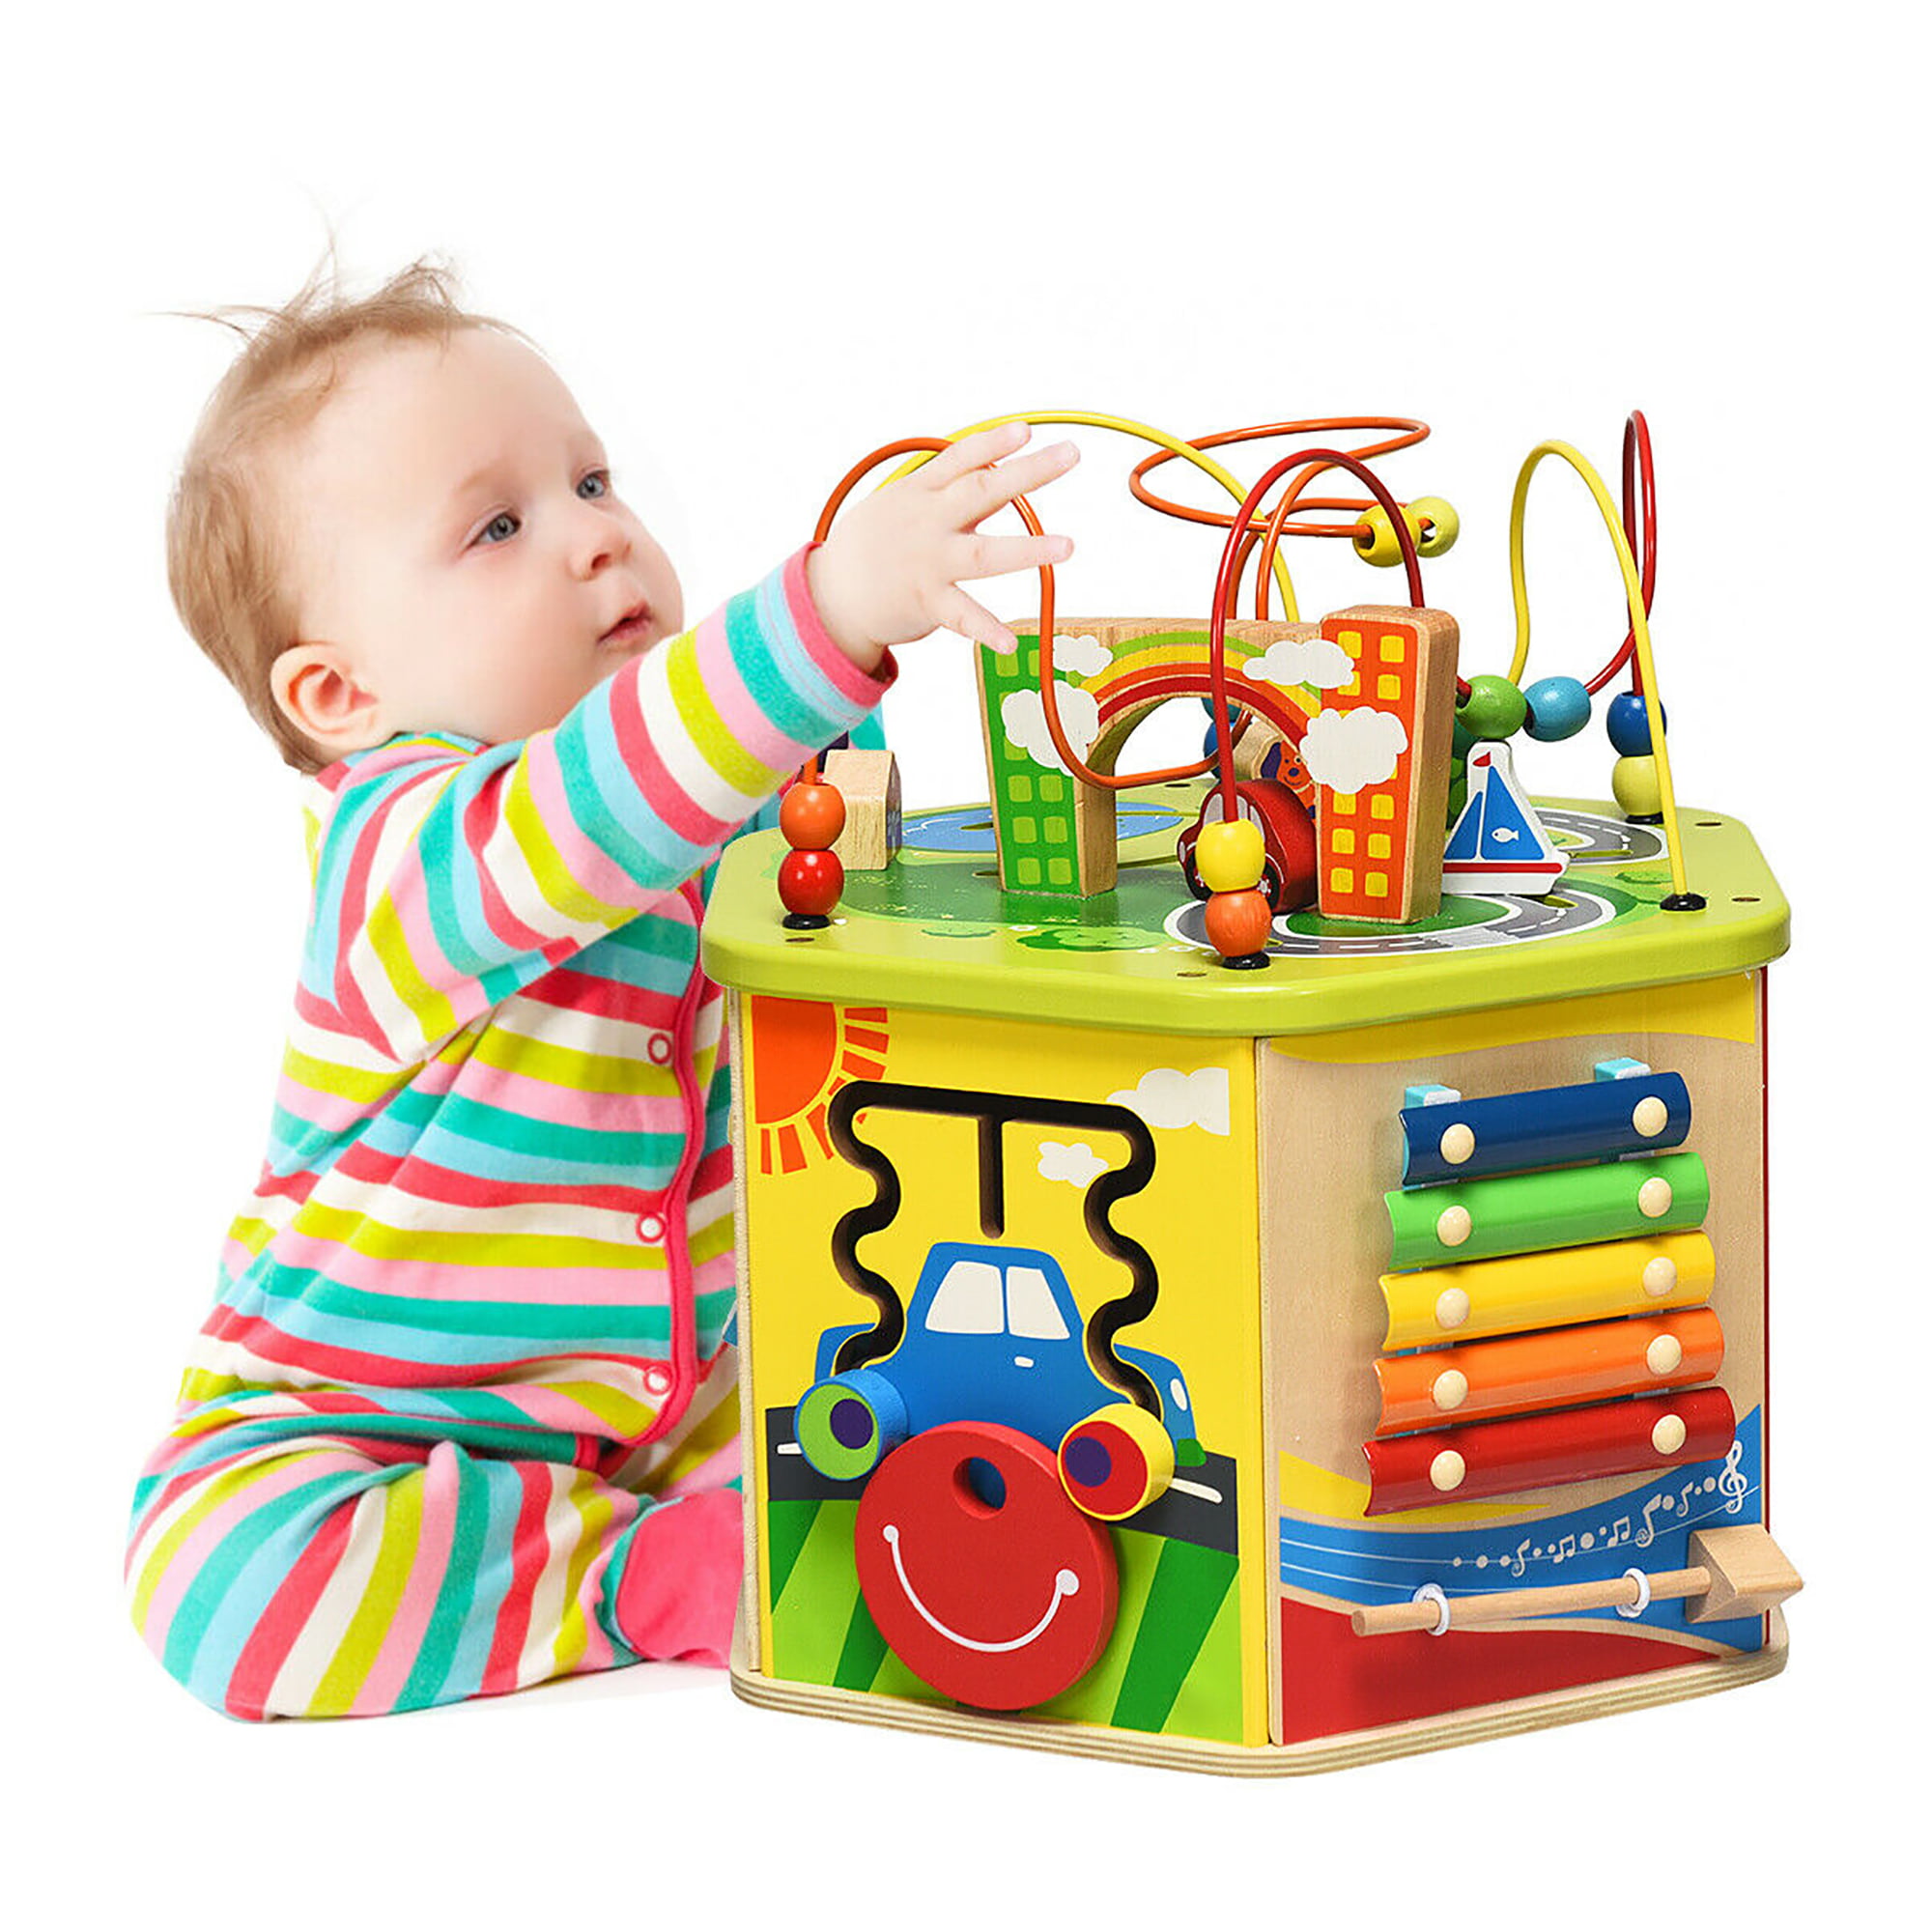 TOP BRIGHT Wooden Activity Cube for 1 Year Old Boy Girl Toddler Toys with Shape 